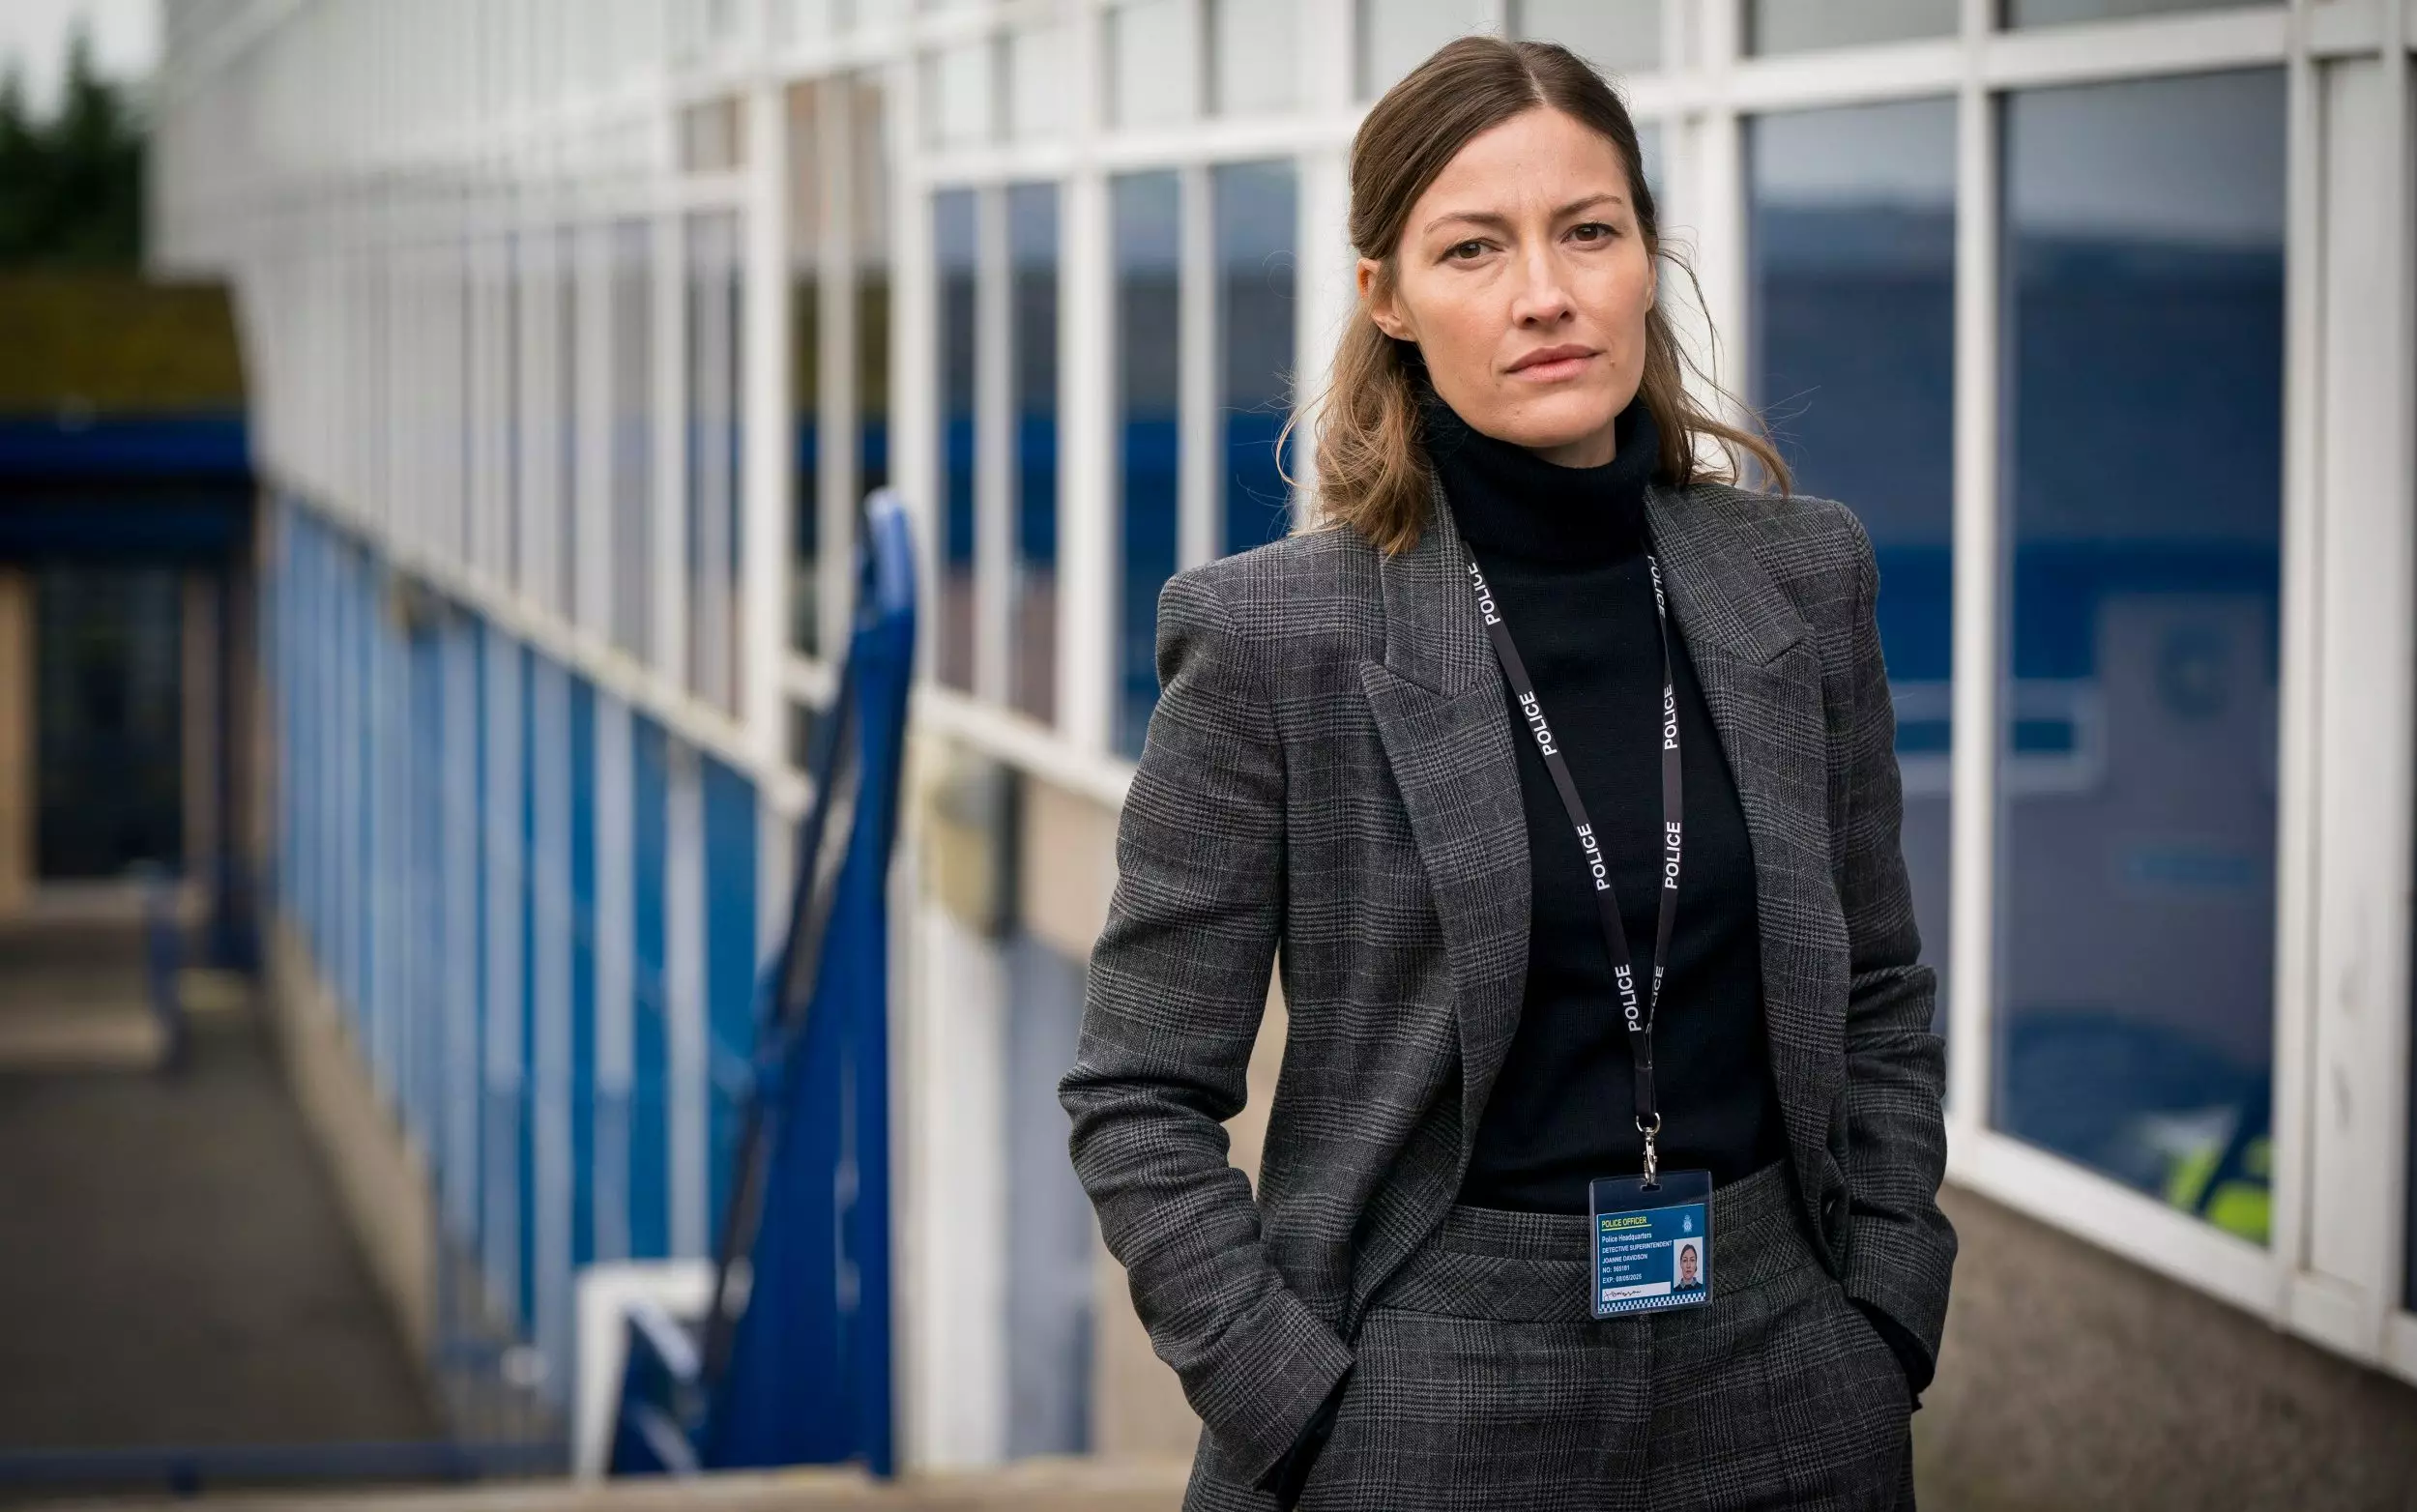 The team begin to investigate DCI Joanne Davidson, played by Kelly Macdonald (